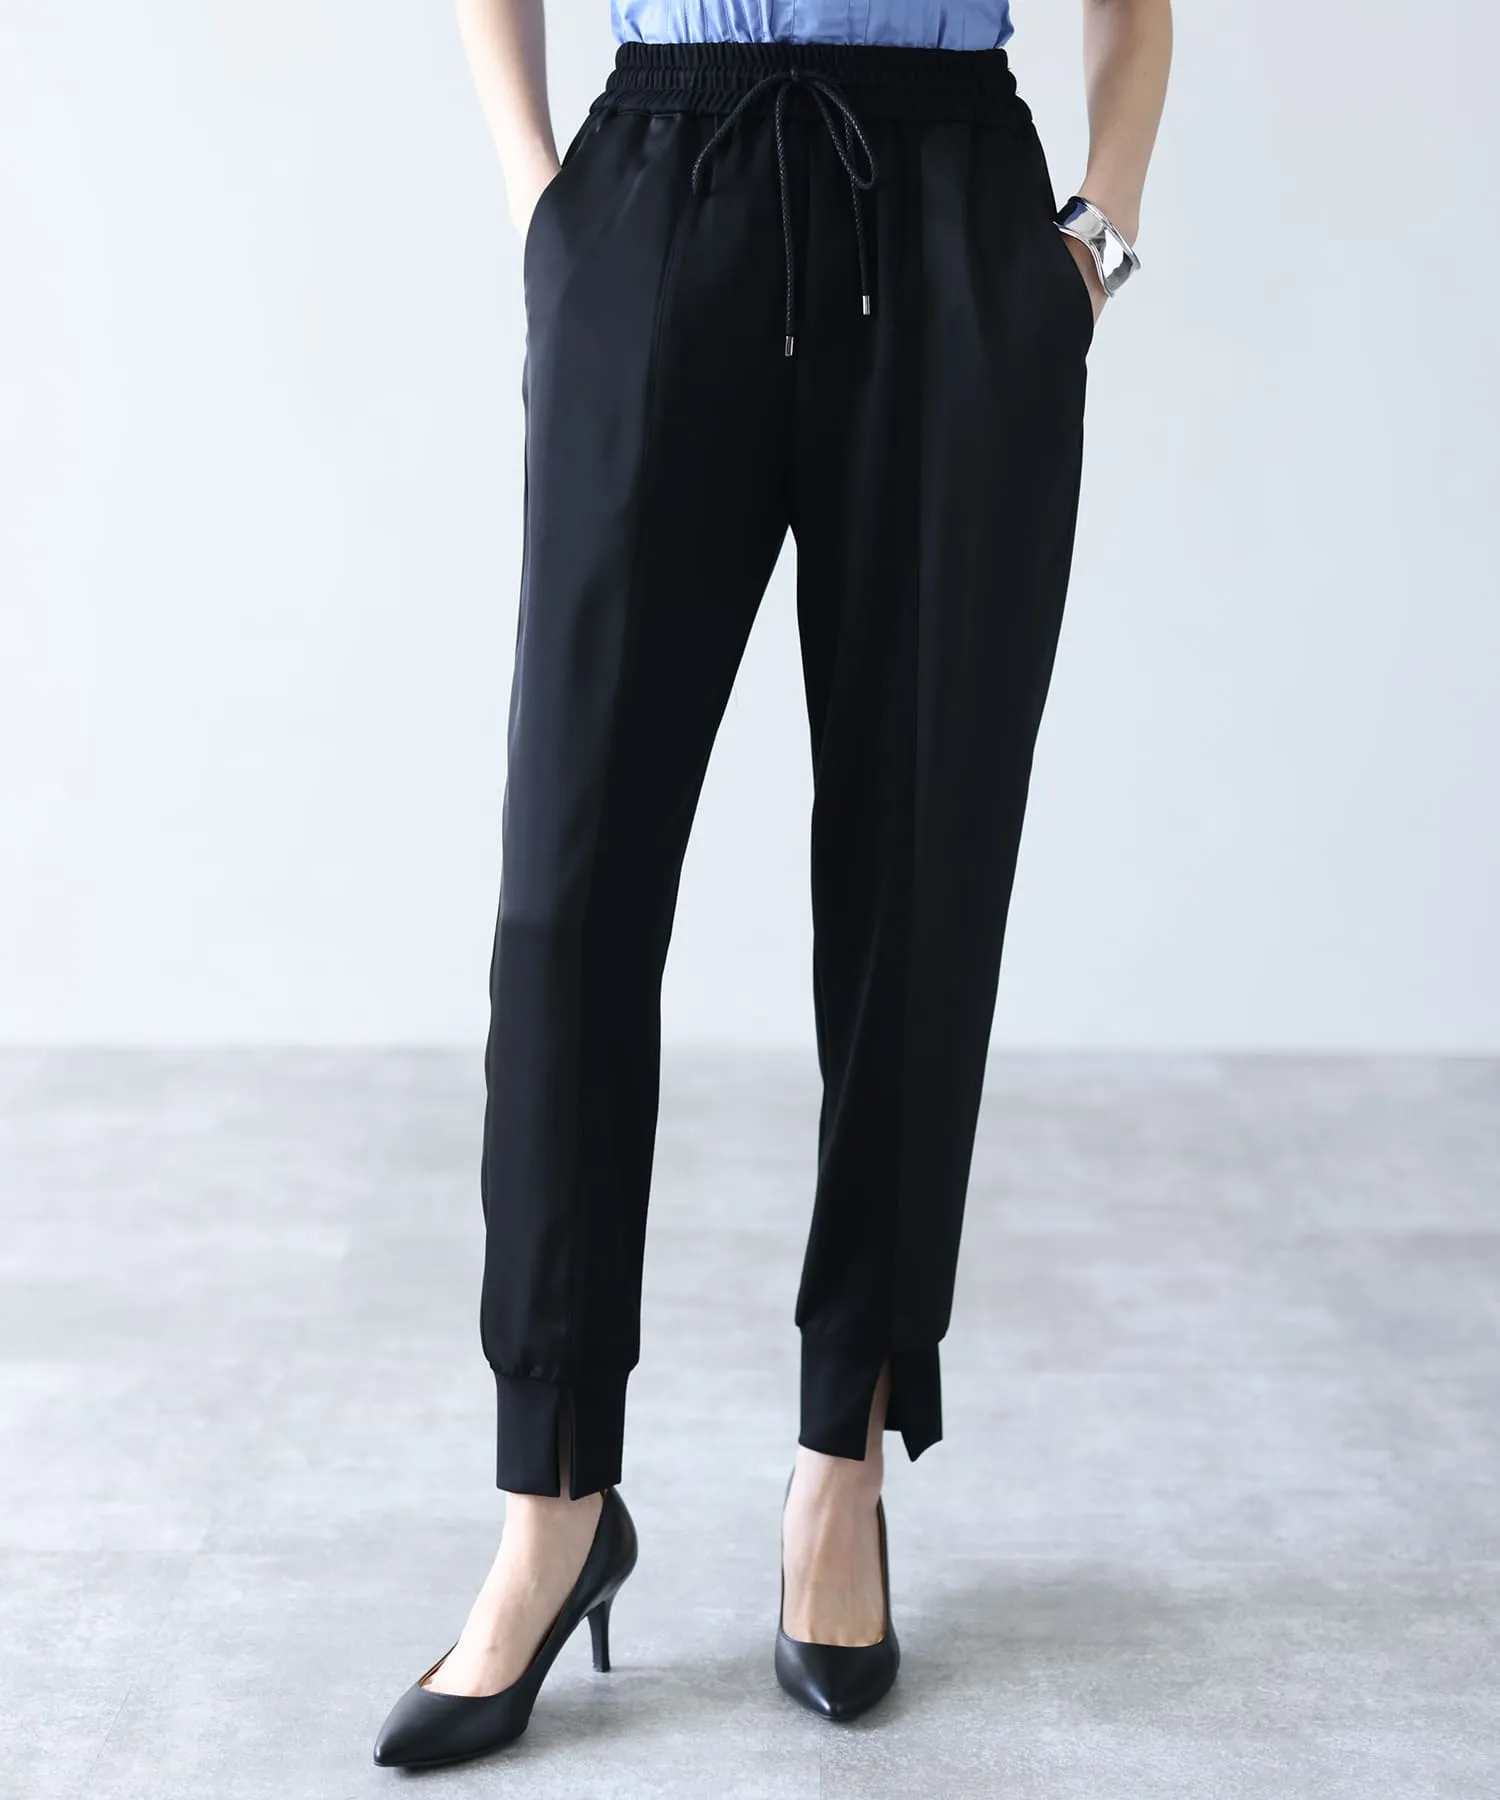 hem slit jogger docking pants | HERENCIA(ヘレンチア) | HERENCIA 